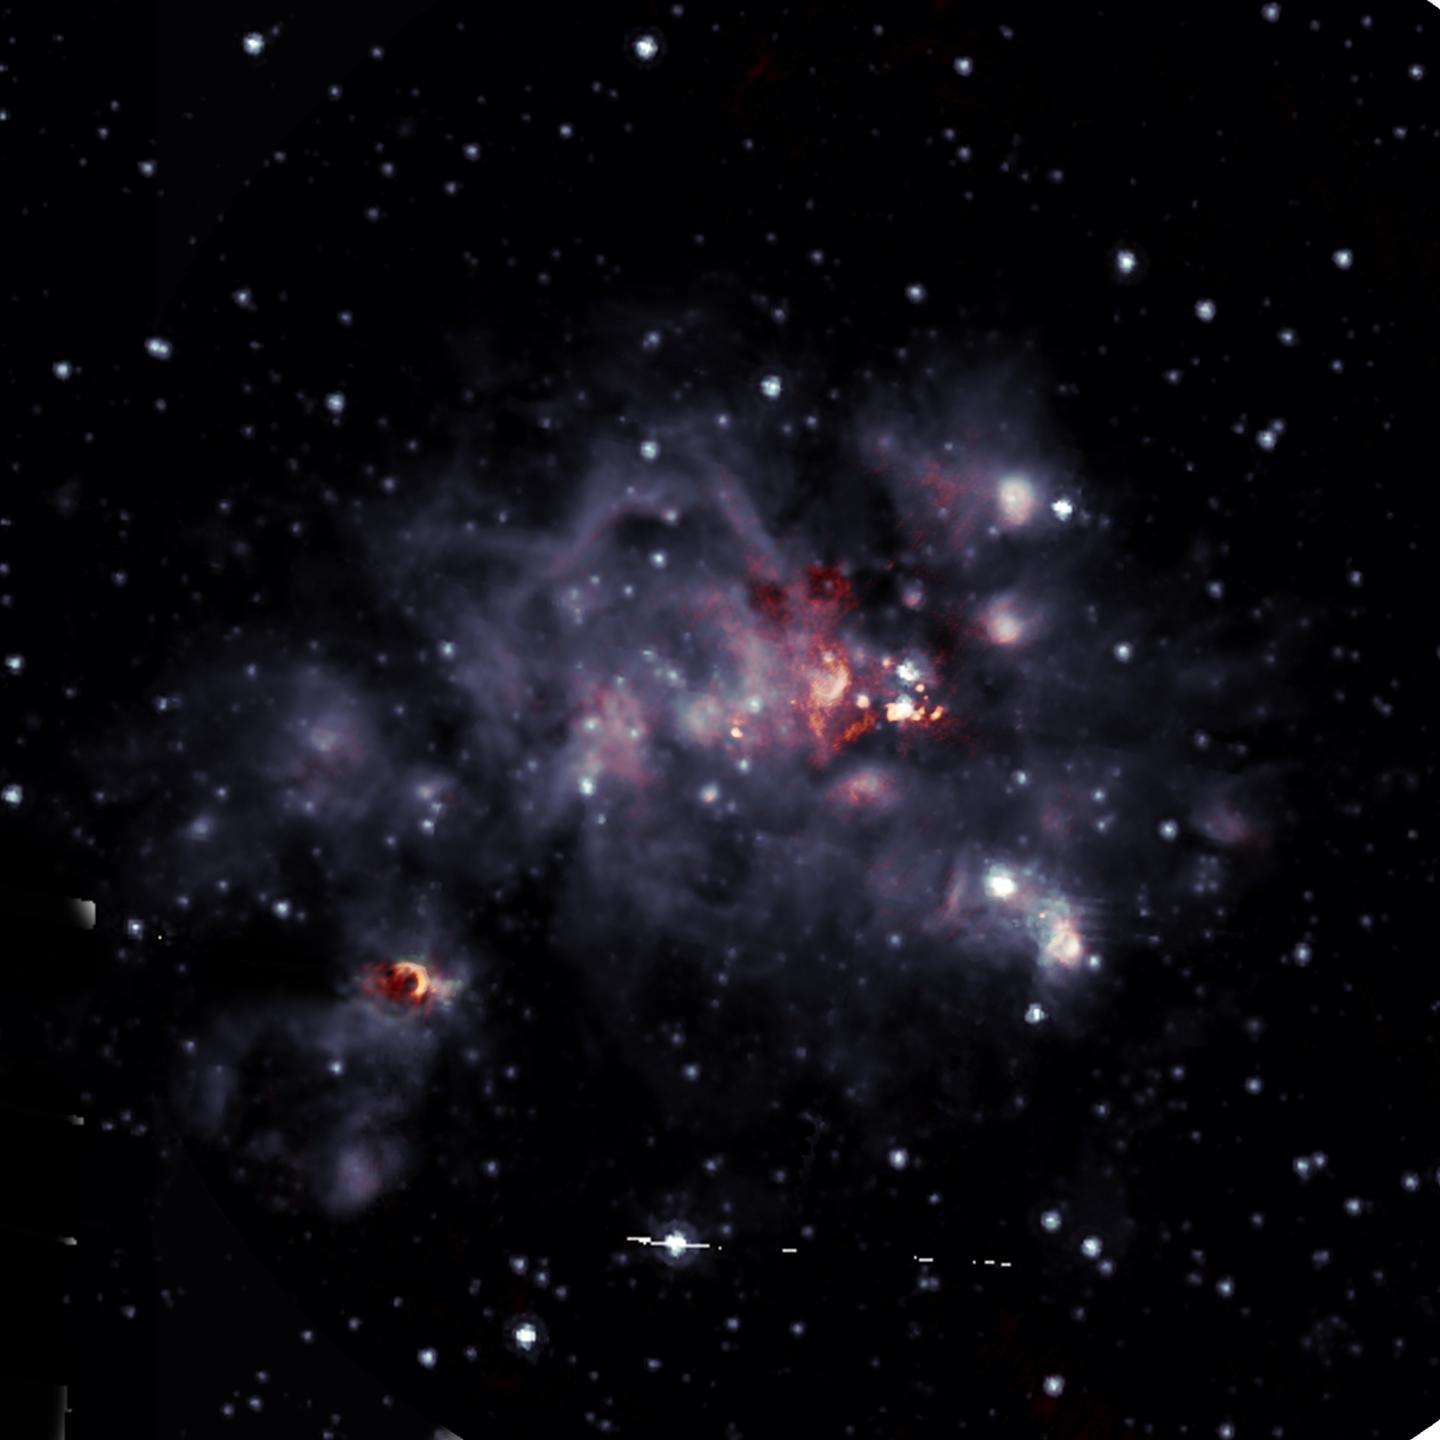 Radio-Infrared Overlay of W49A Star-Forming Region